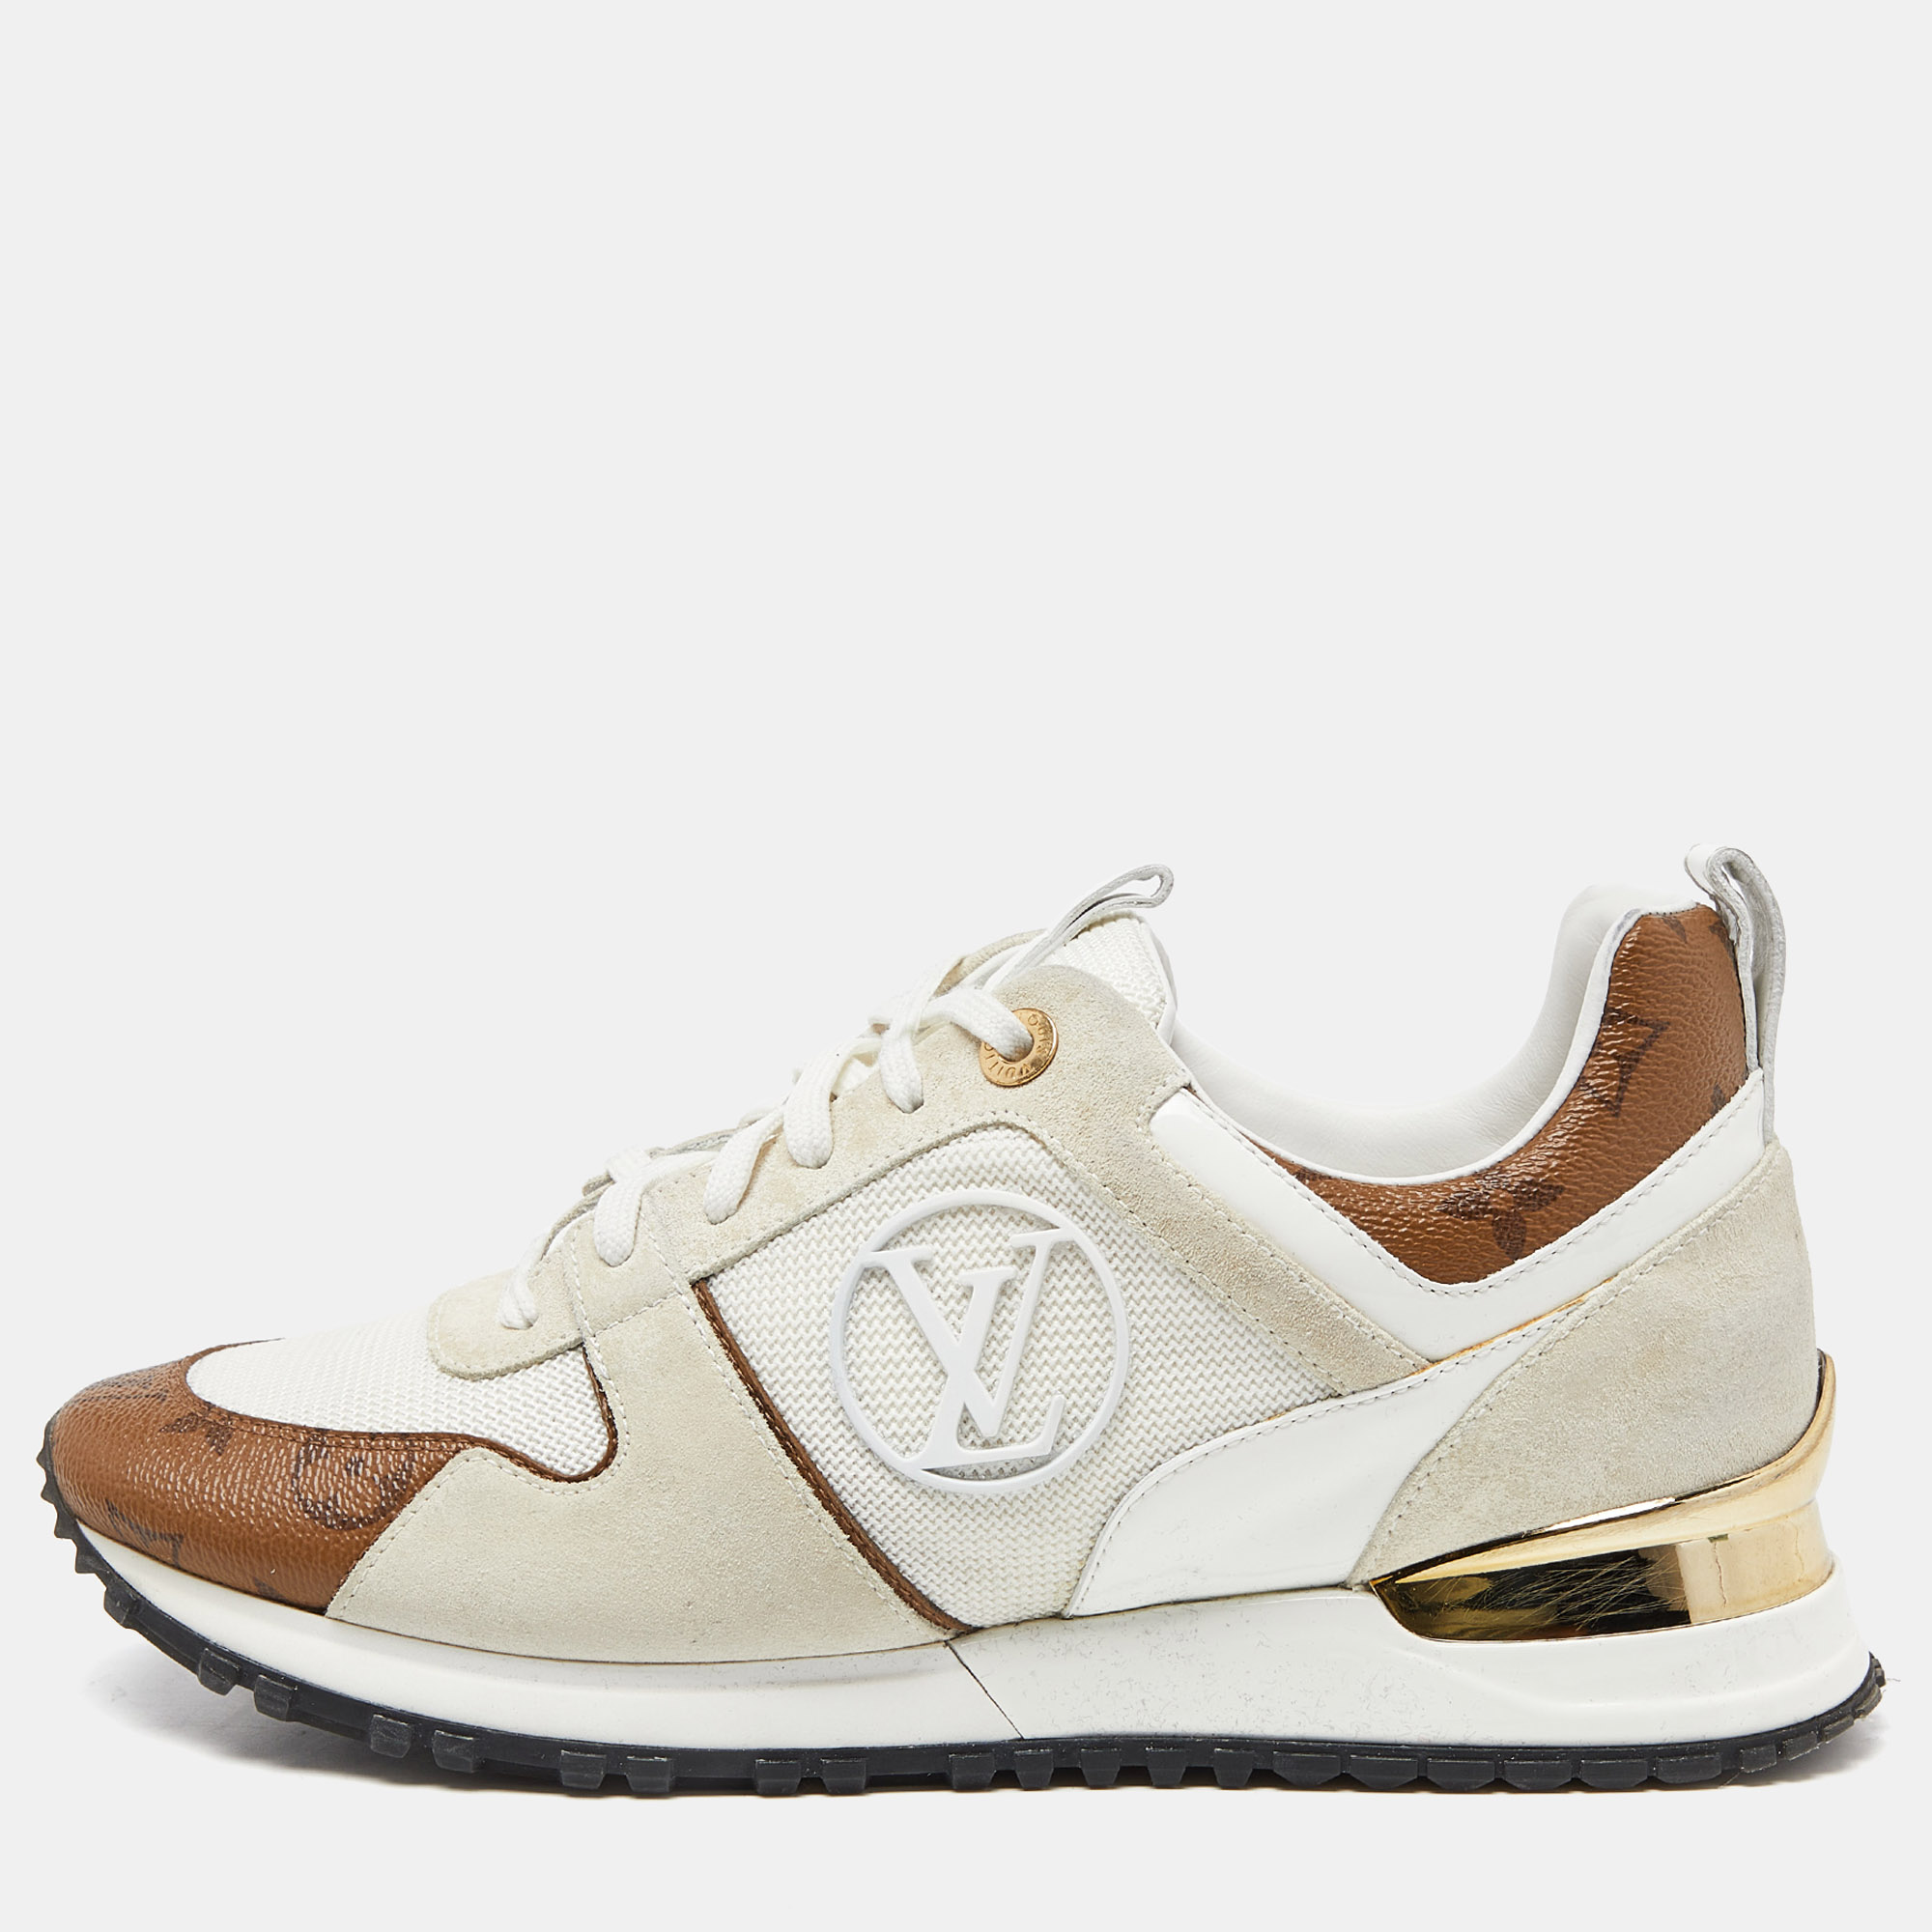 Add a statement appeal to your outfit with these Louis Vuitton off white sneakers. Made from premium materials they feature signature details for a luxe look.